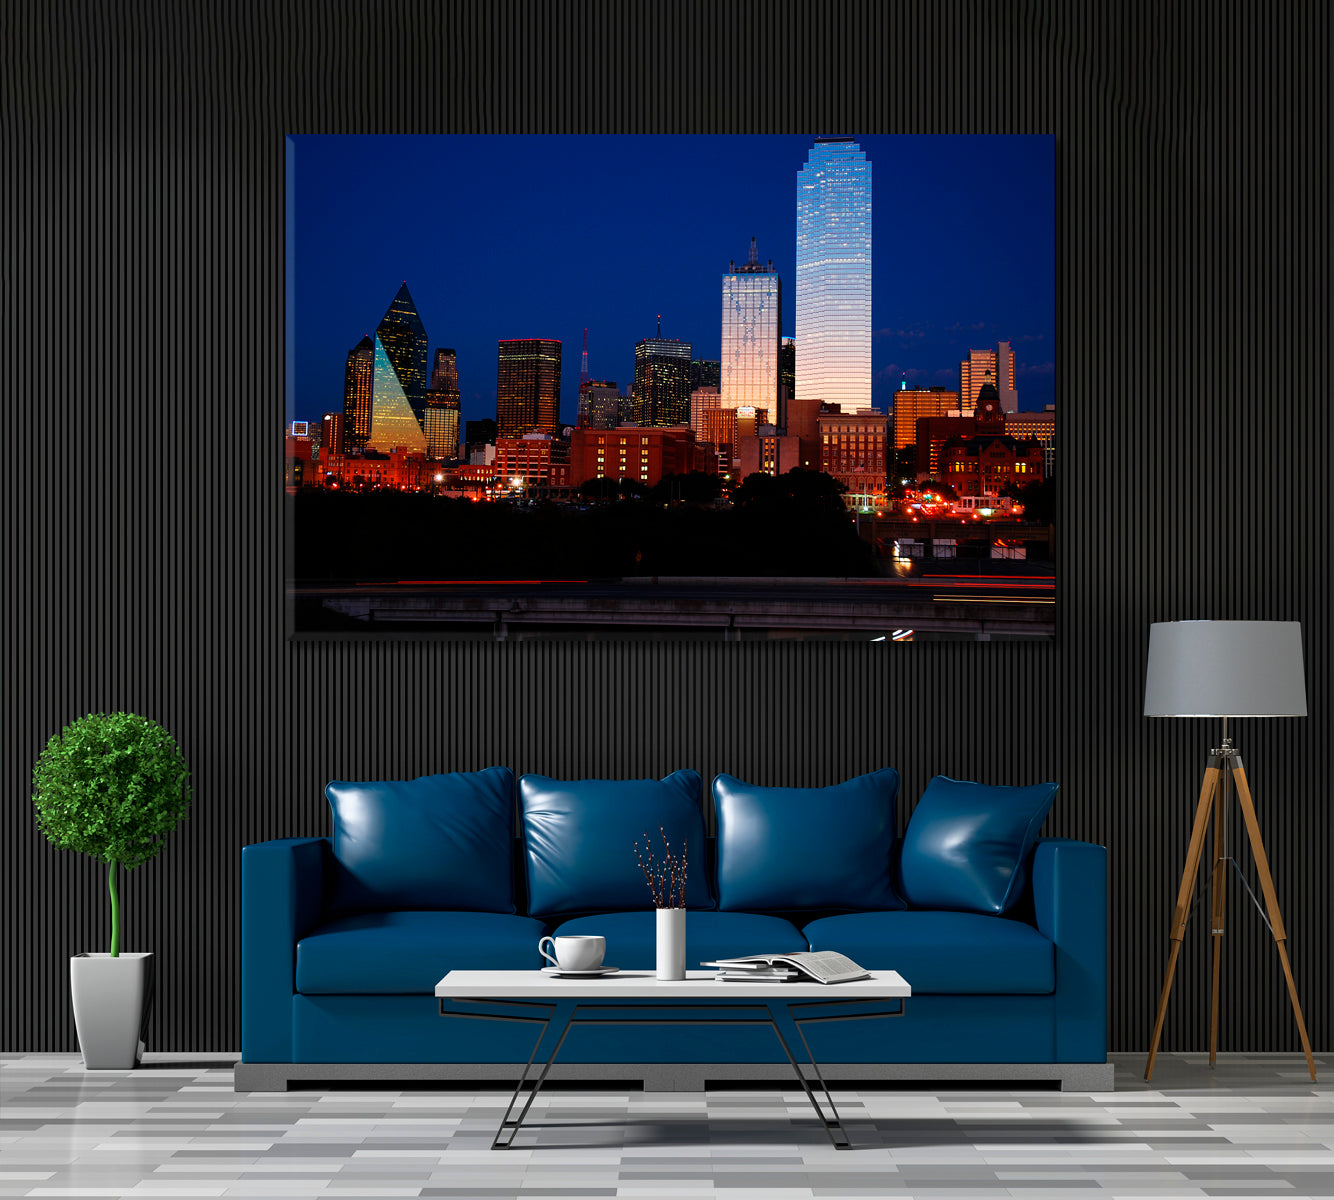 Dallas Skyscrapers at Dusk Canvas Print ArtLexy 1 Panel 24"x16" inches 